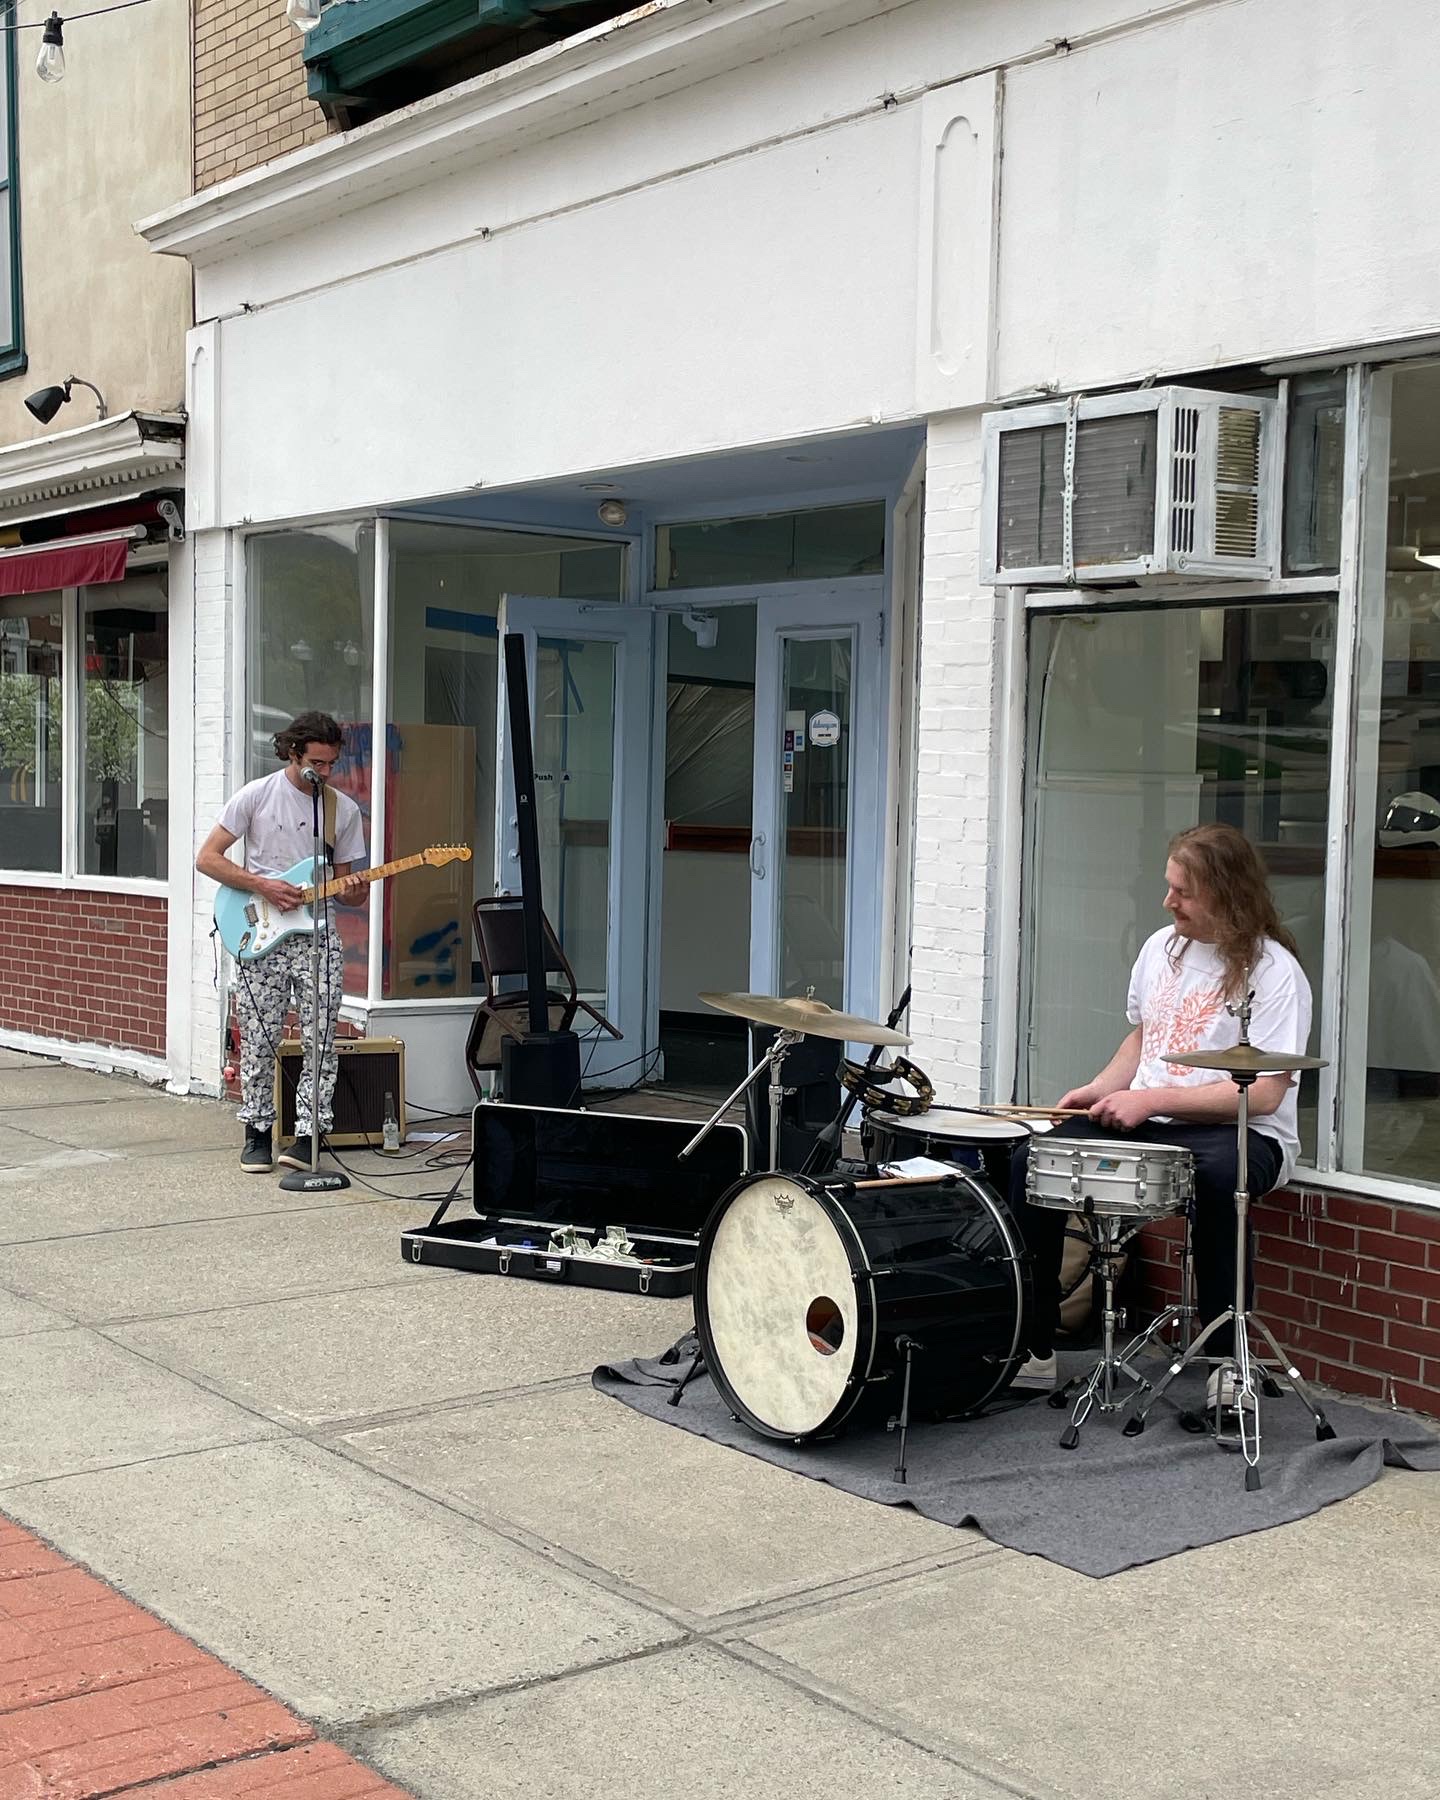 A man playing guitar and another man playing drums on a sidewalk at a block party in an urban neighborhood.